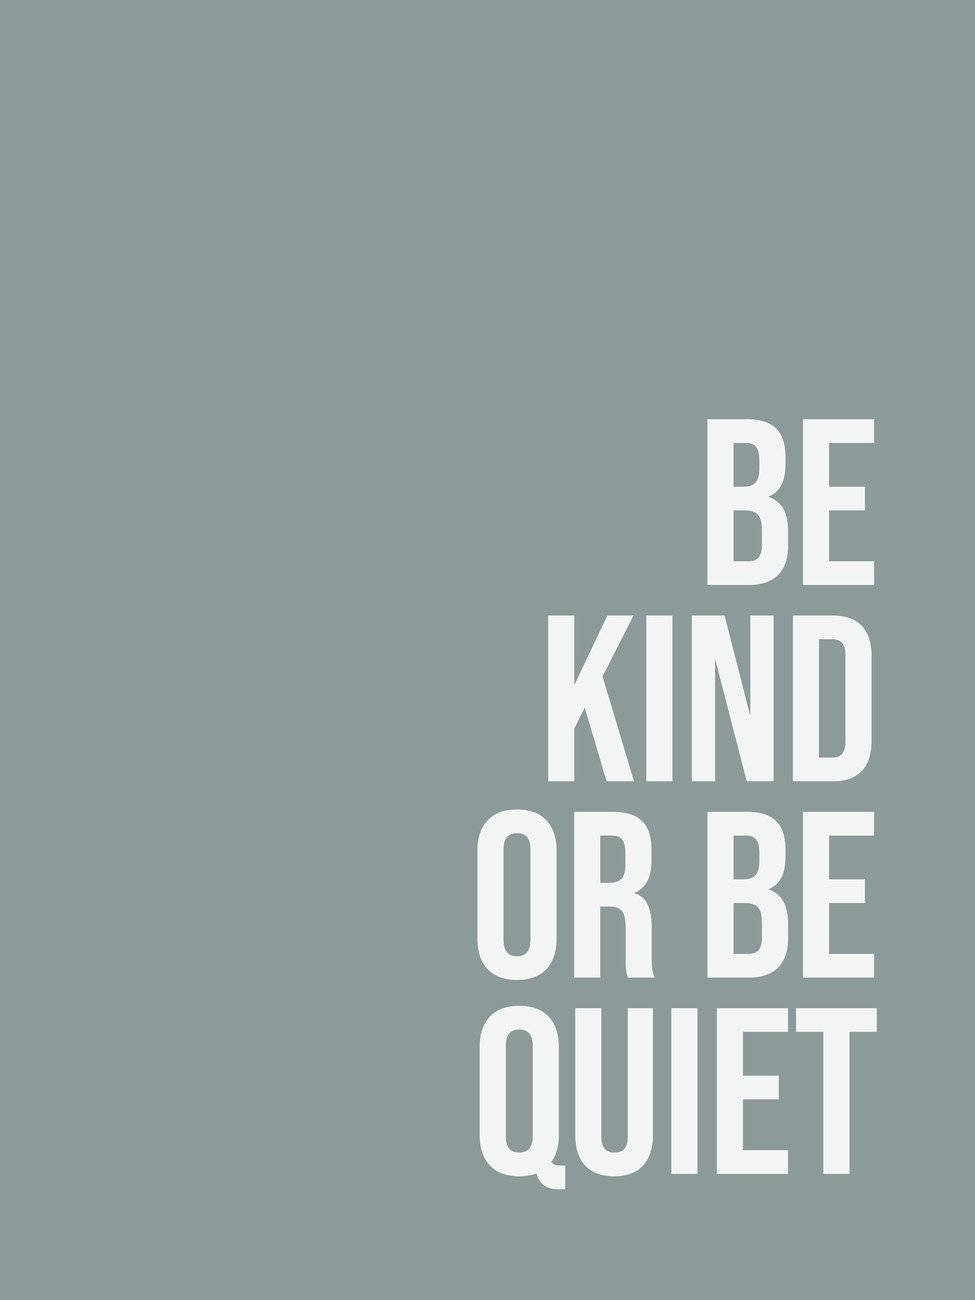 Inspirational quote on a serene background, "Be kind or be quiet" Wallpaper